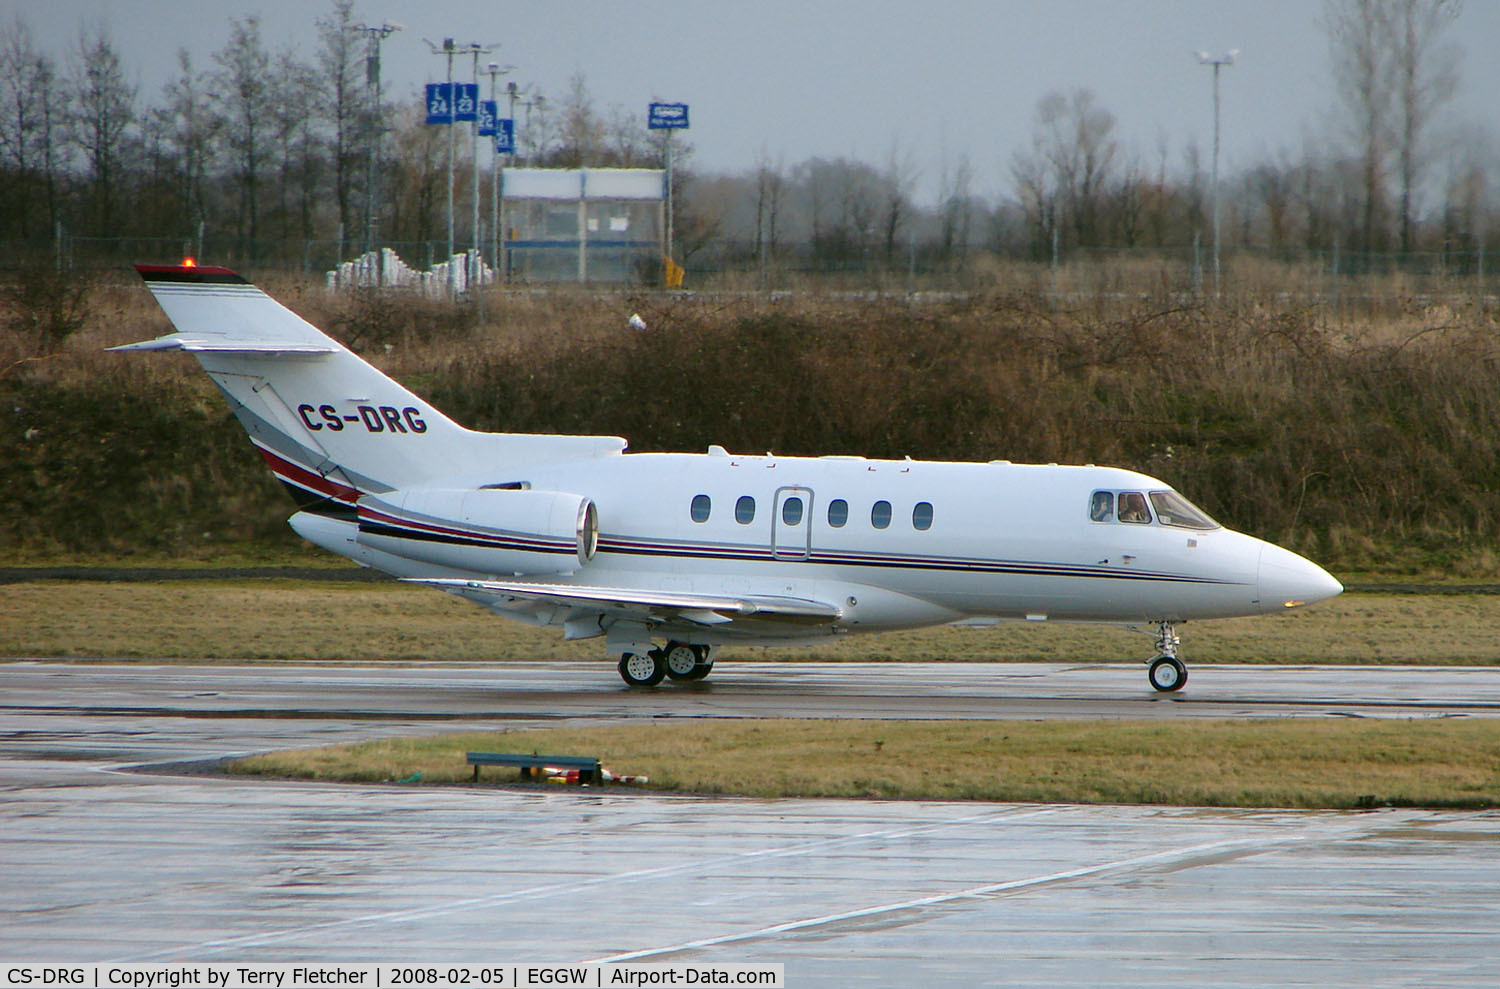 CS-DRG, 2005 Raytheon Hawker 800XP C/N 258741, Netjets Hawker 800XP taxies out at Luton in Feb 2008